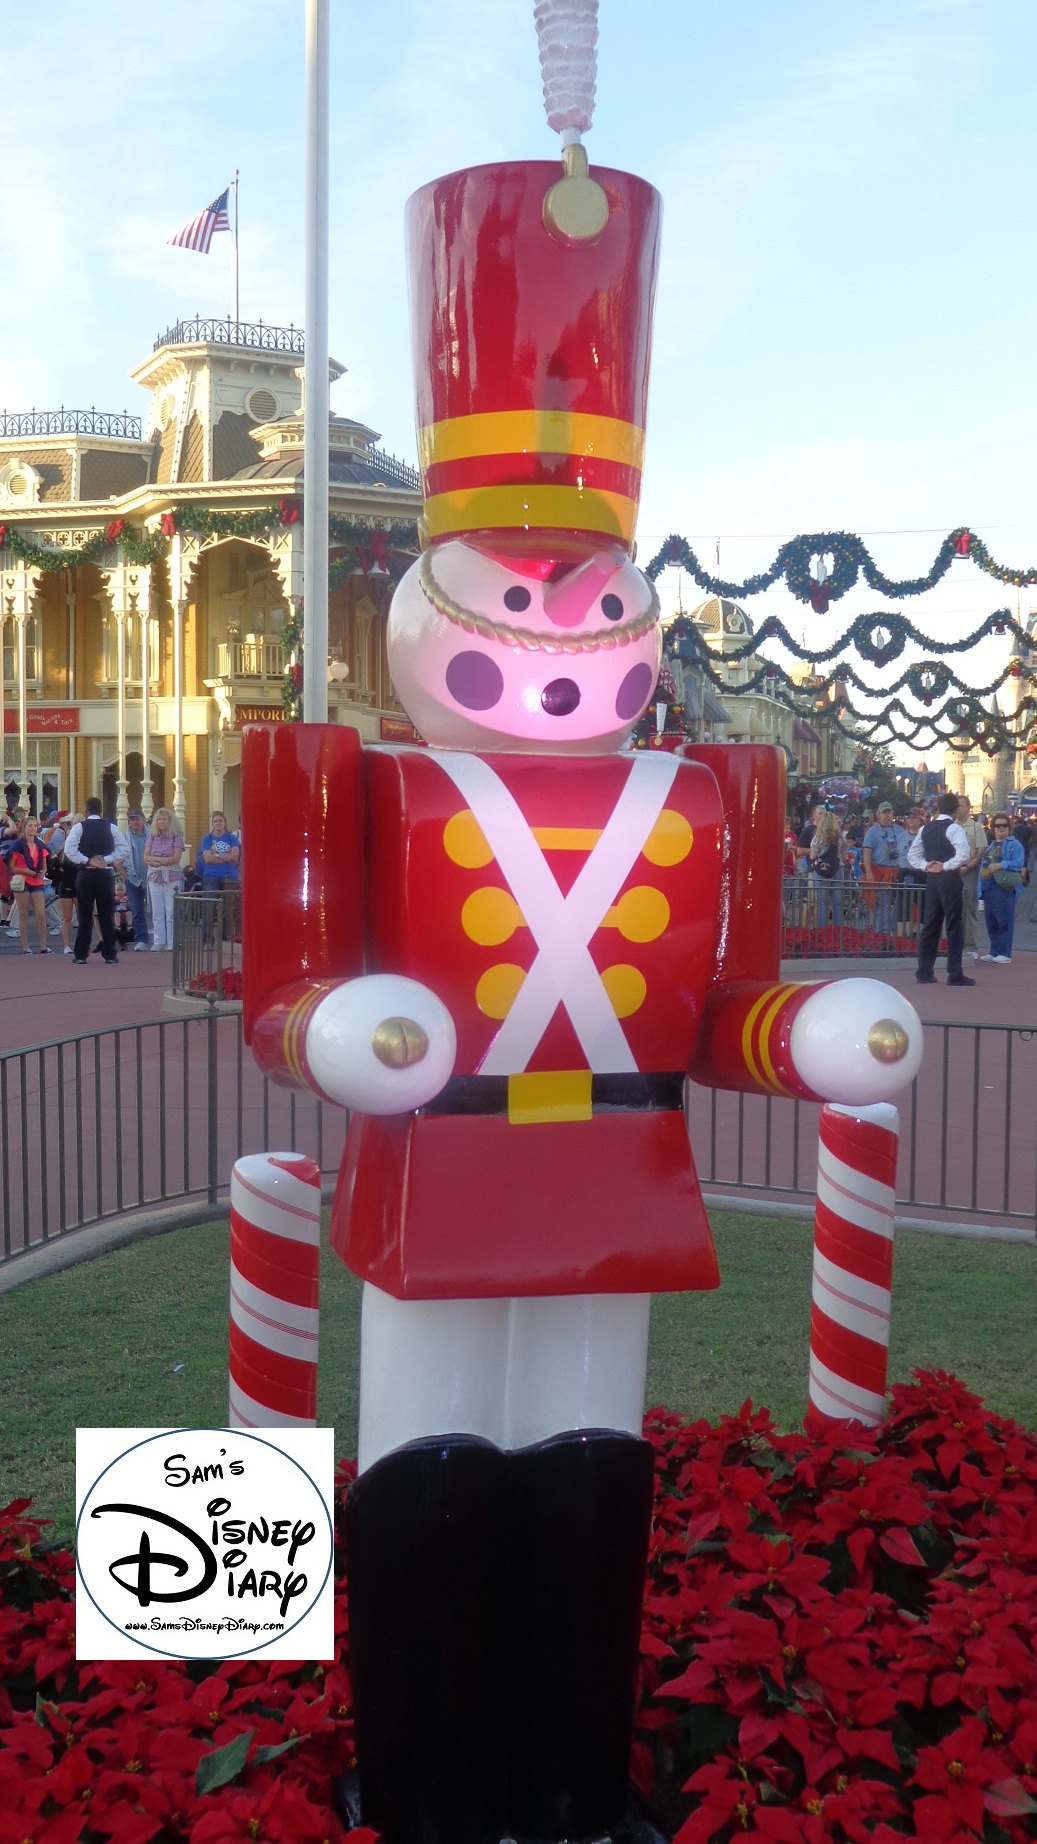 The Toy Soldiers are a must see during the parade, and a great photo op in town square. 